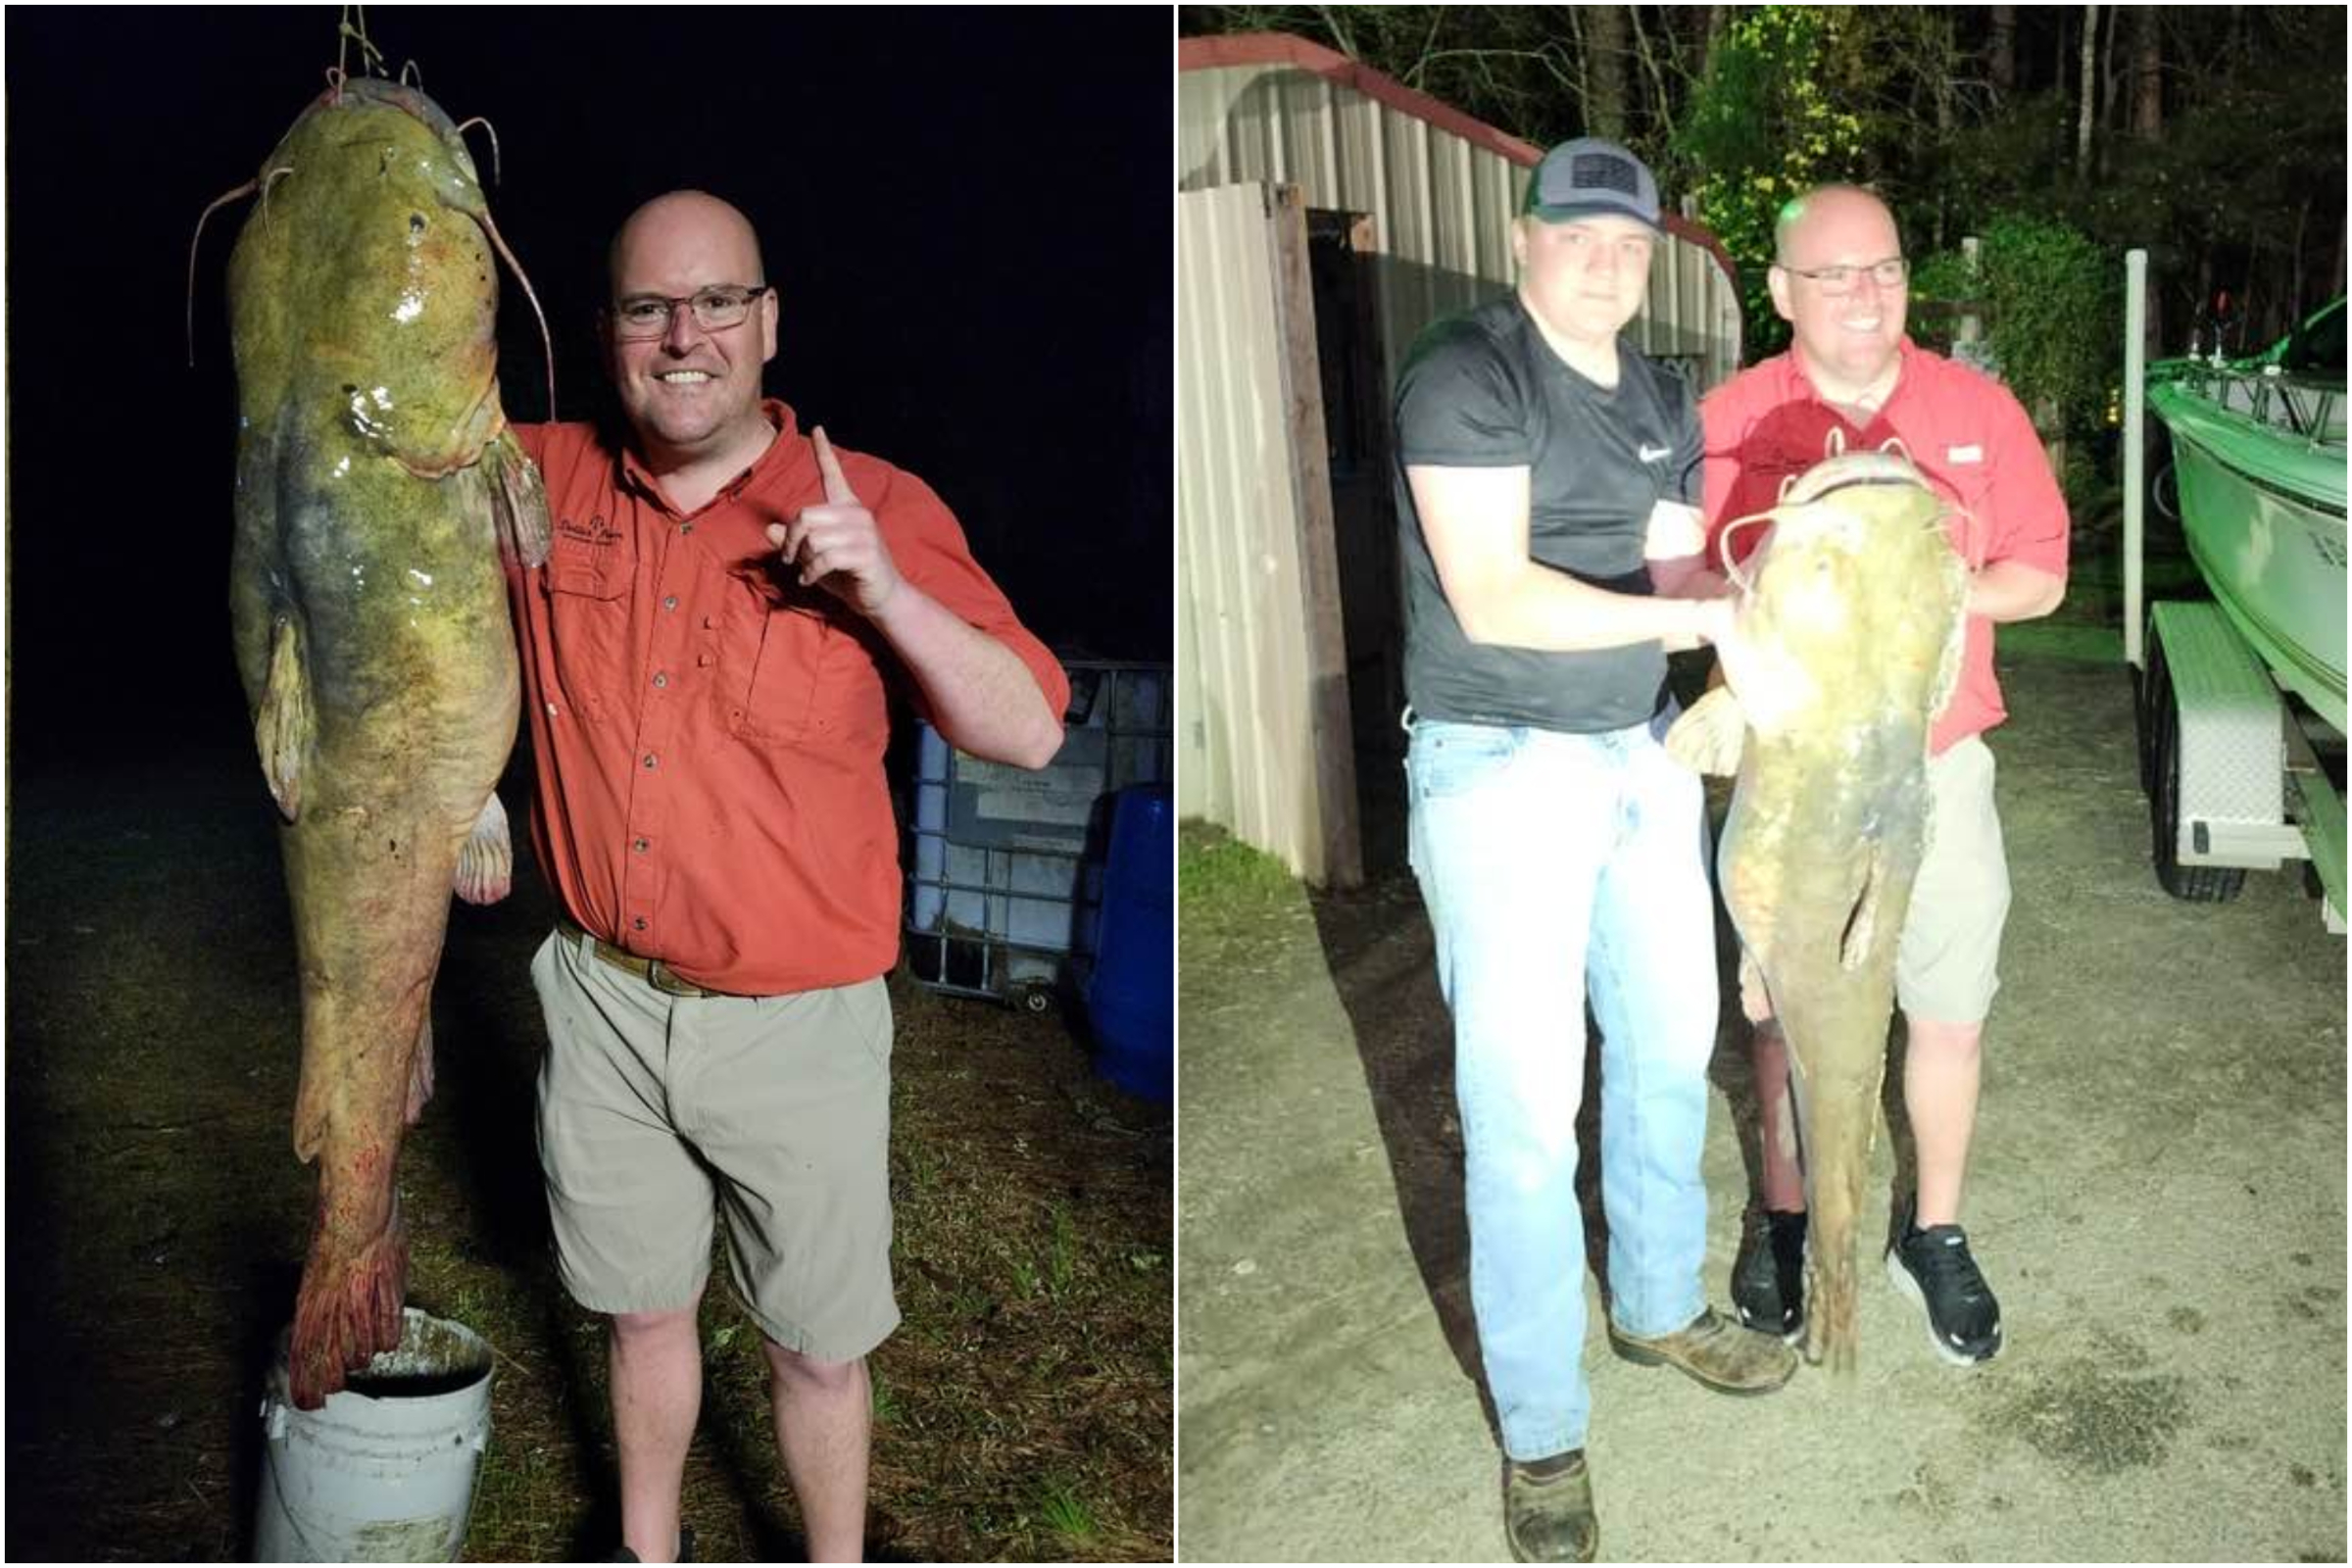 Angler Breaks Local Record With 70 Lb Catfish After Nearly Hour-Long Battle